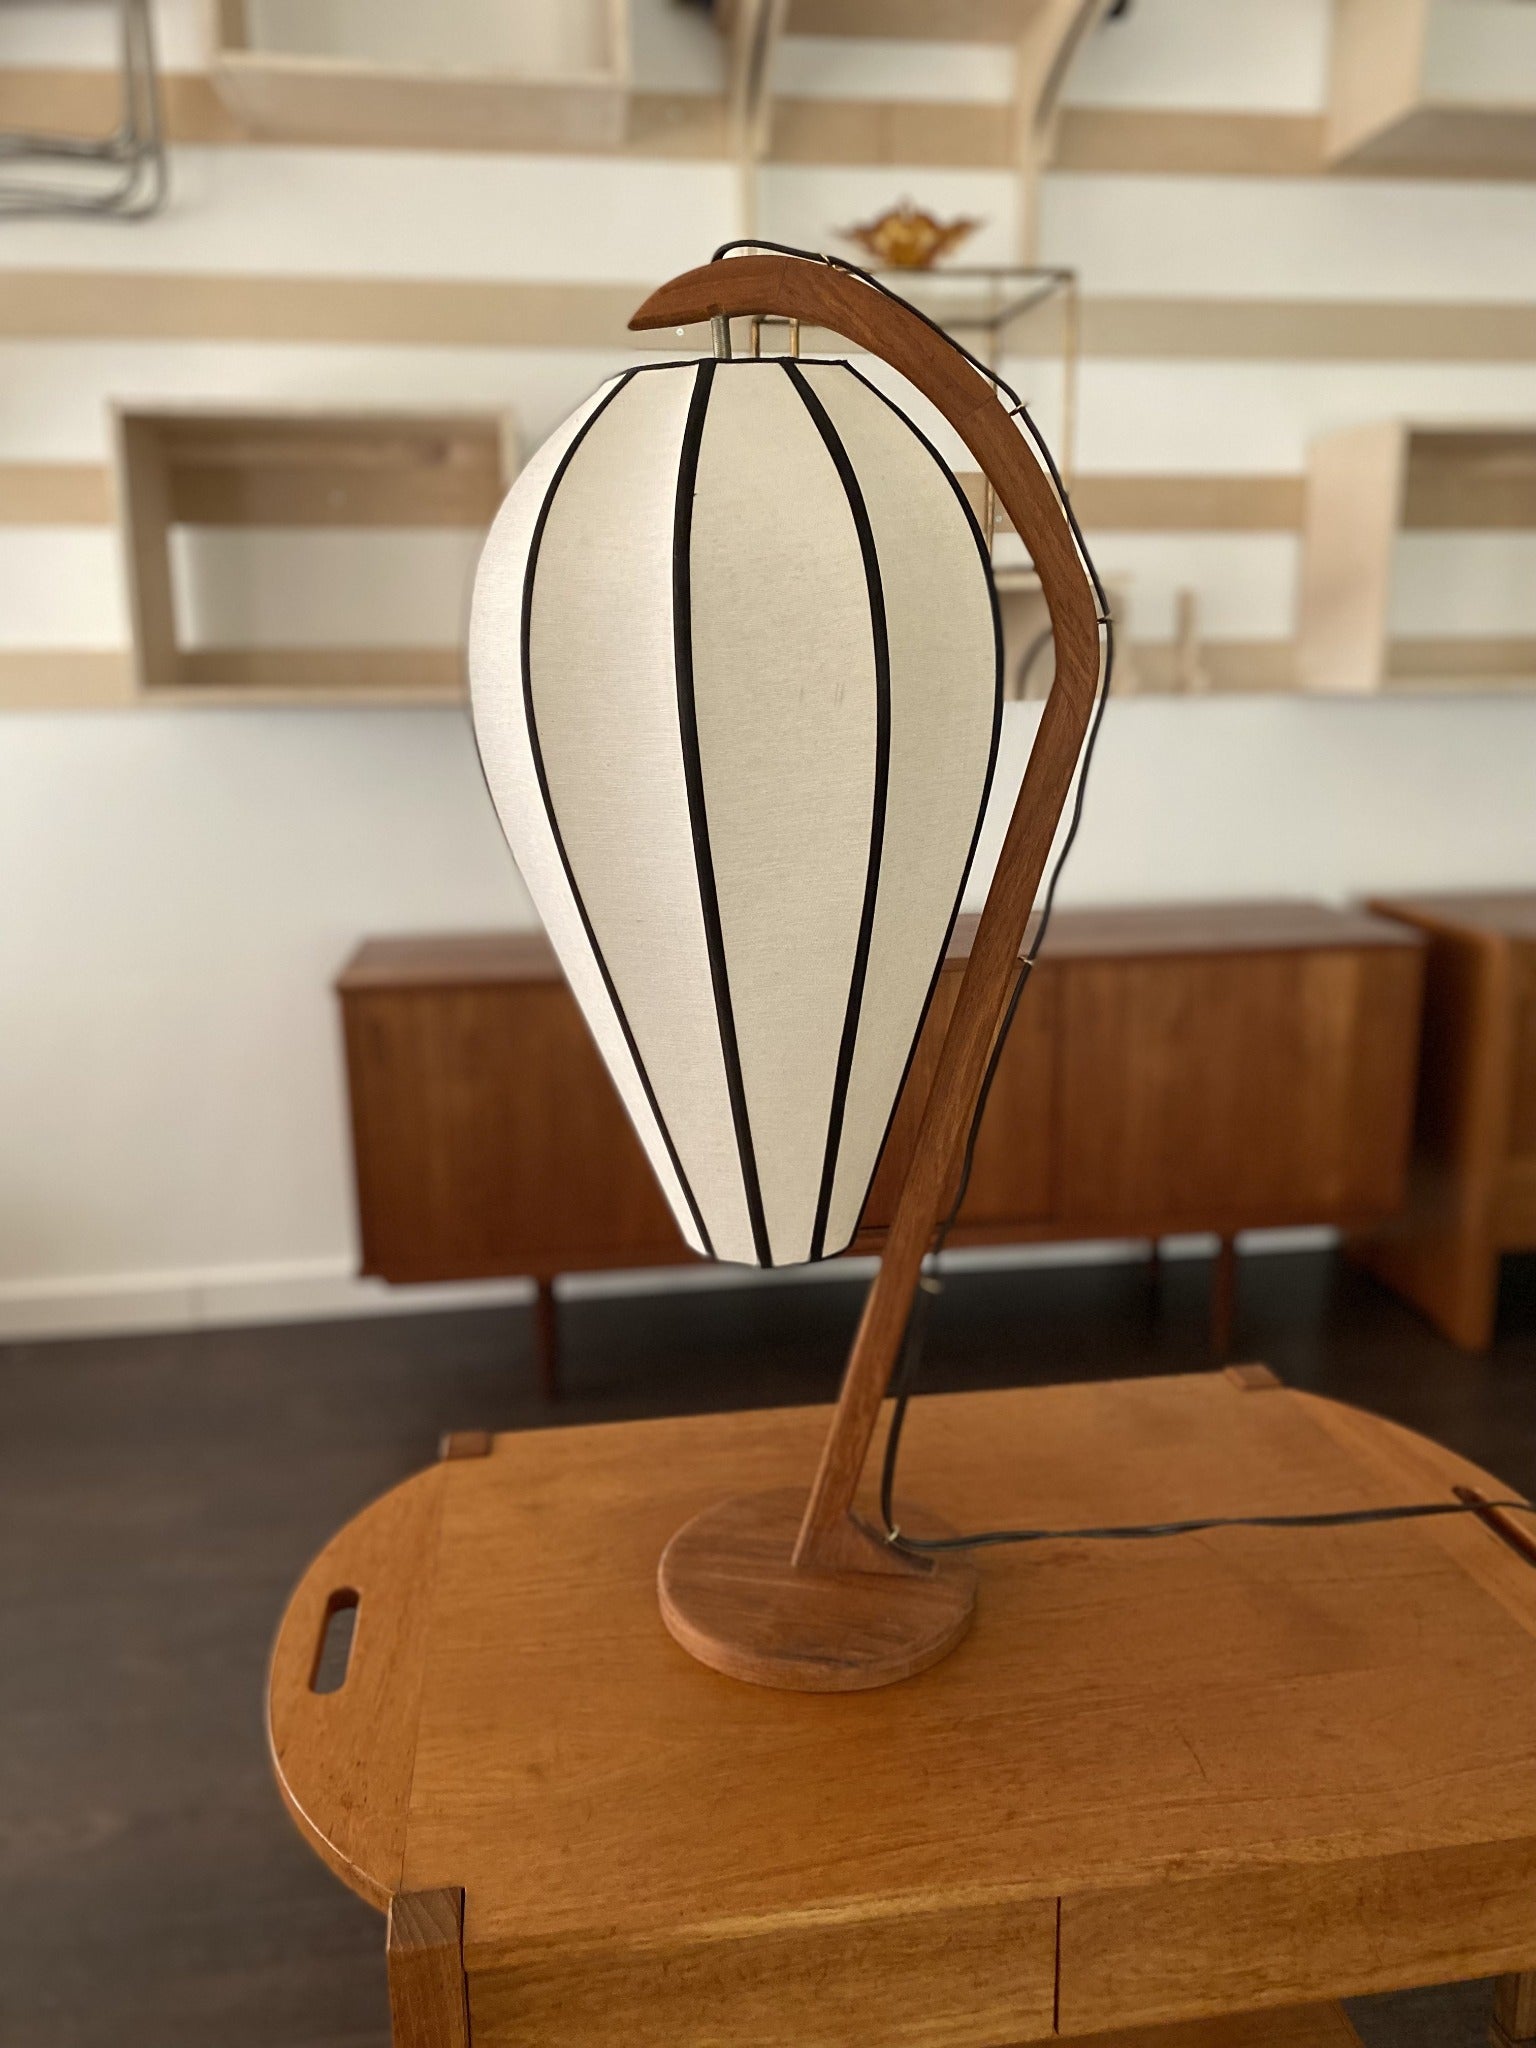 Reclaimed teak table lamp with unique wasp nest shaped shade-Cook Street Vintage